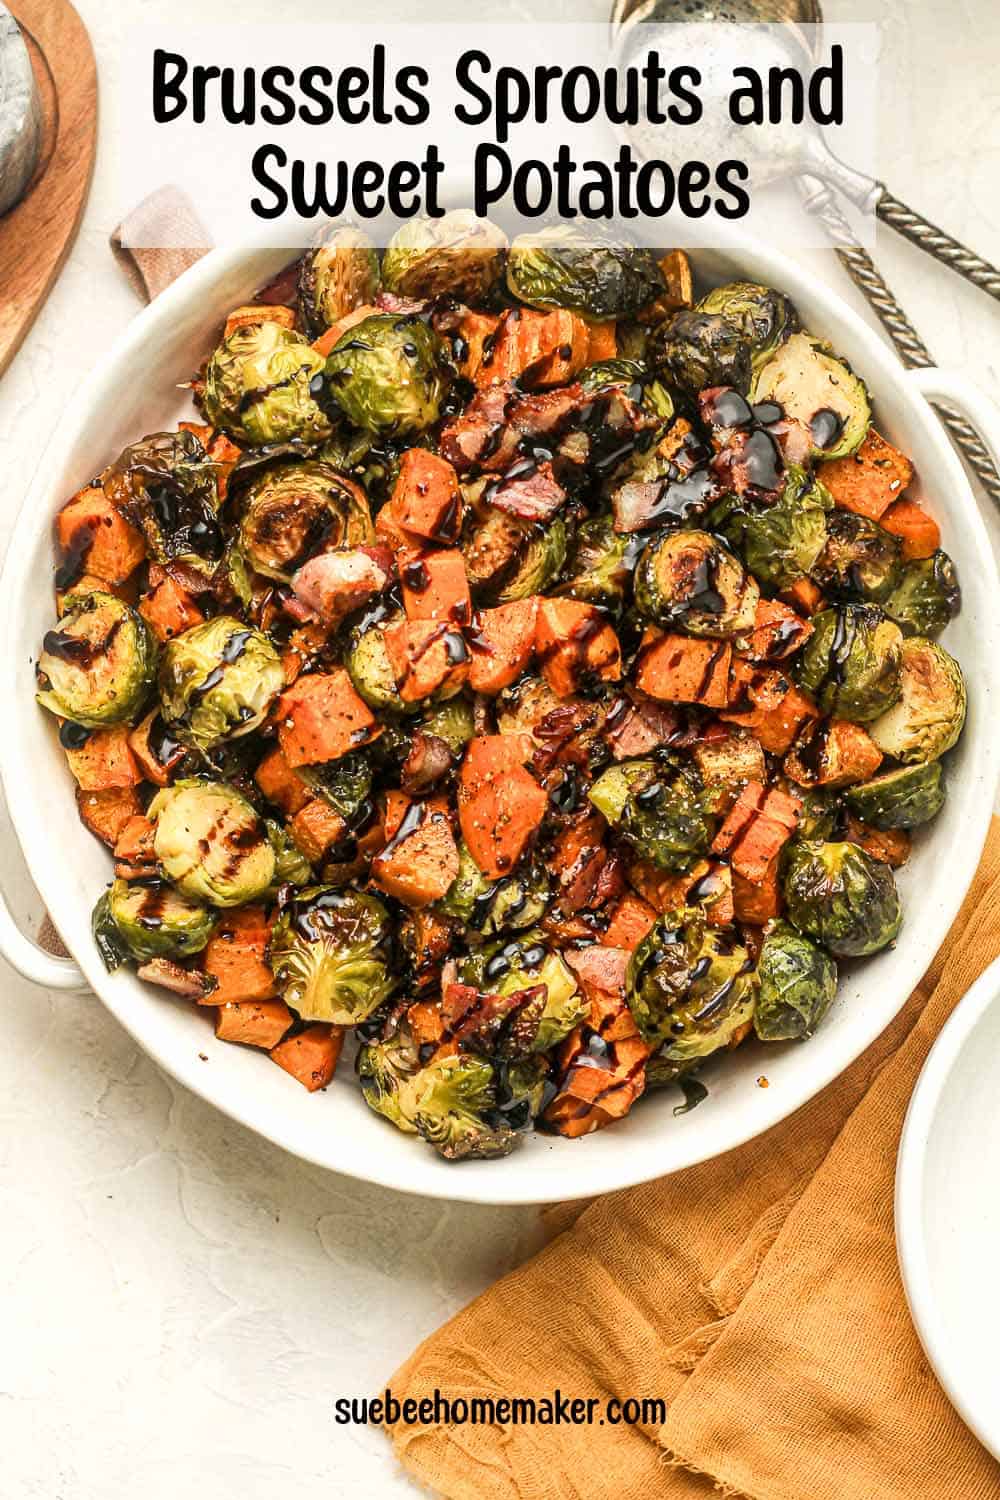 A large serving bowl of brussels sprouts and sweet potatoes with balsamic glaze.